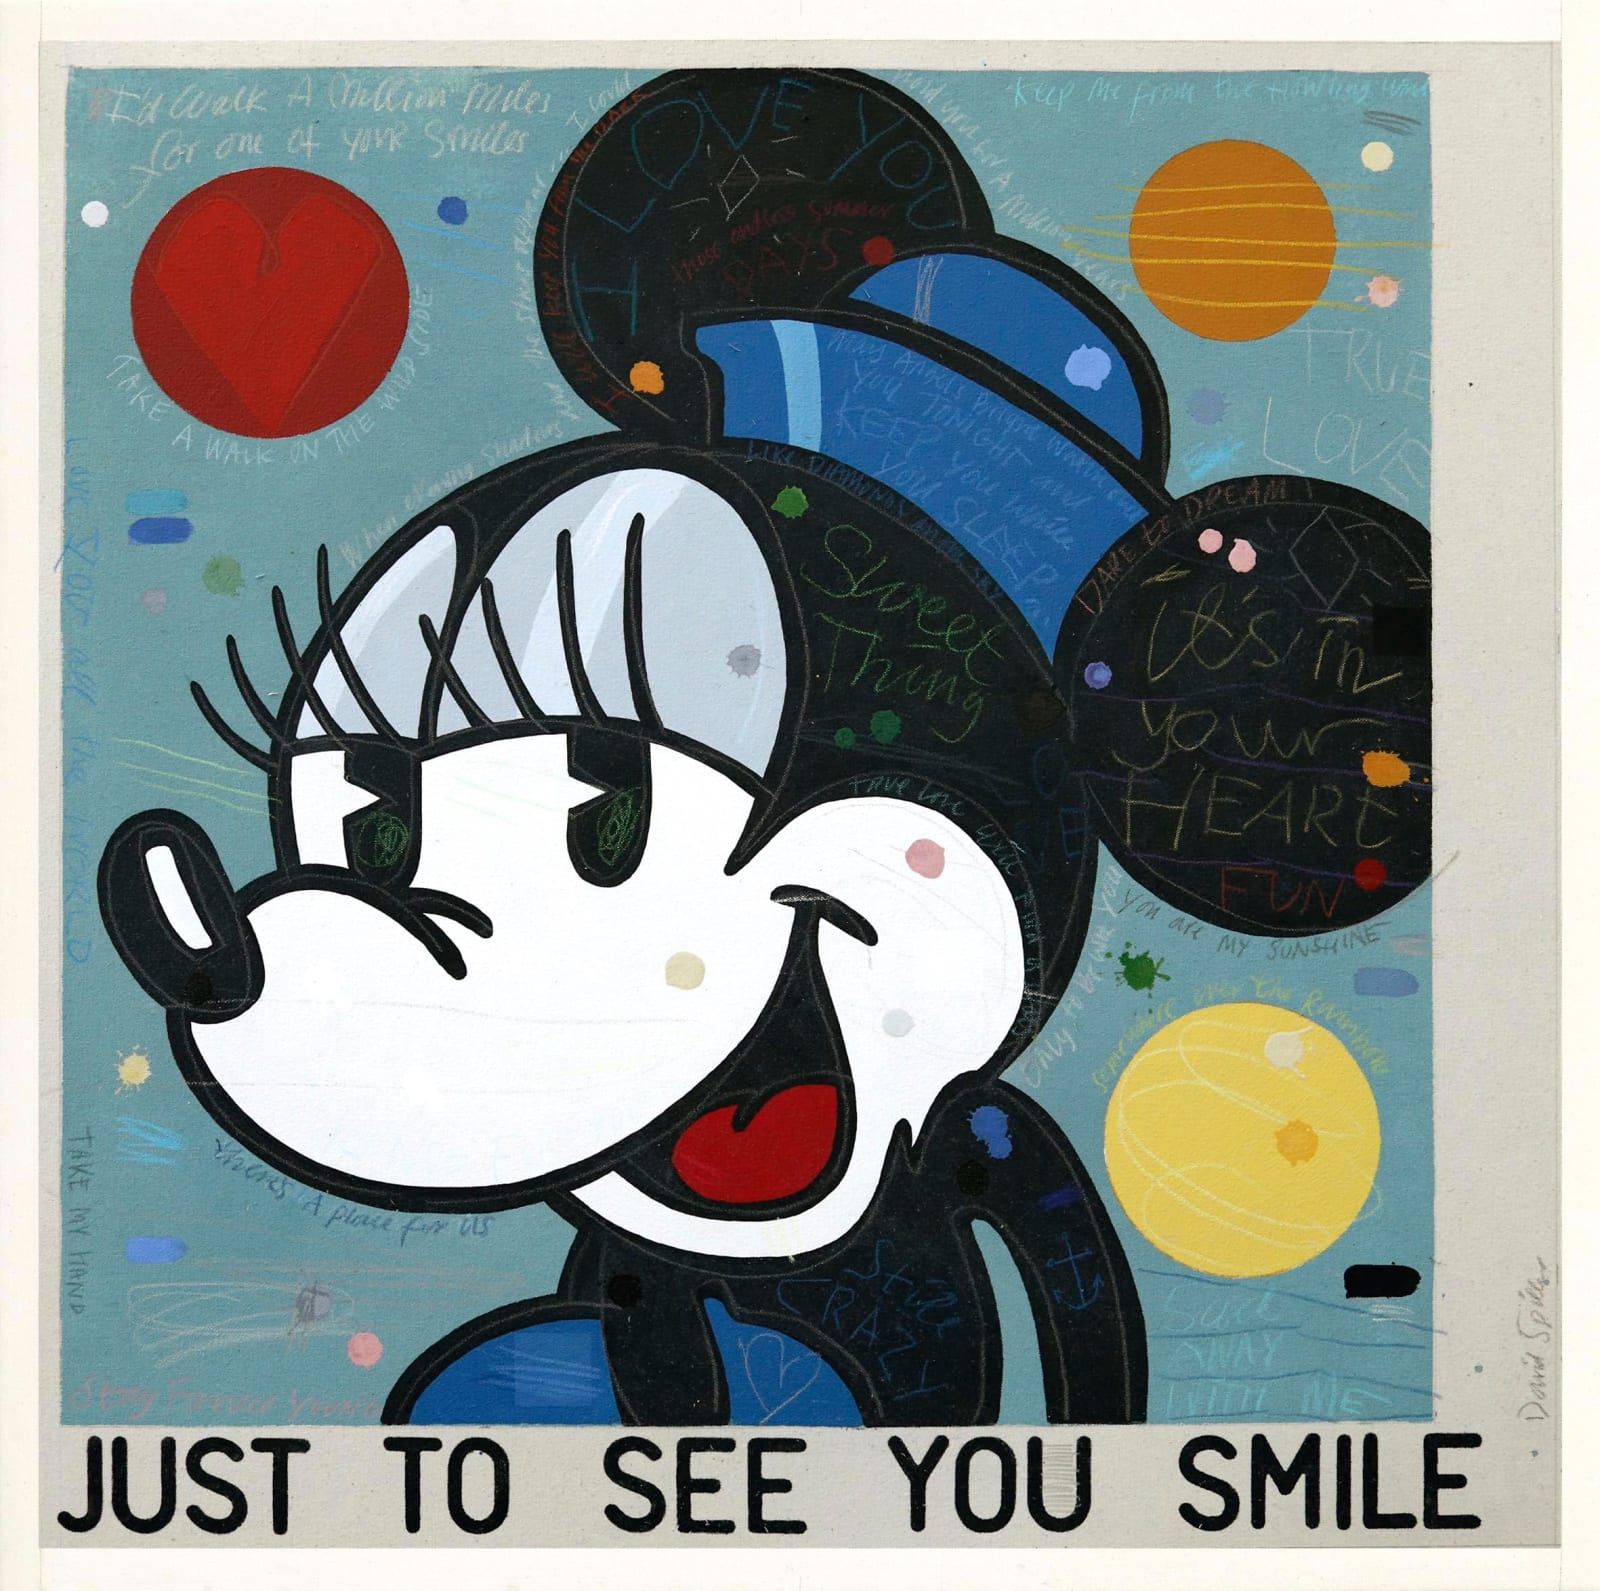 David Spiller, Just to see you smile, 2015